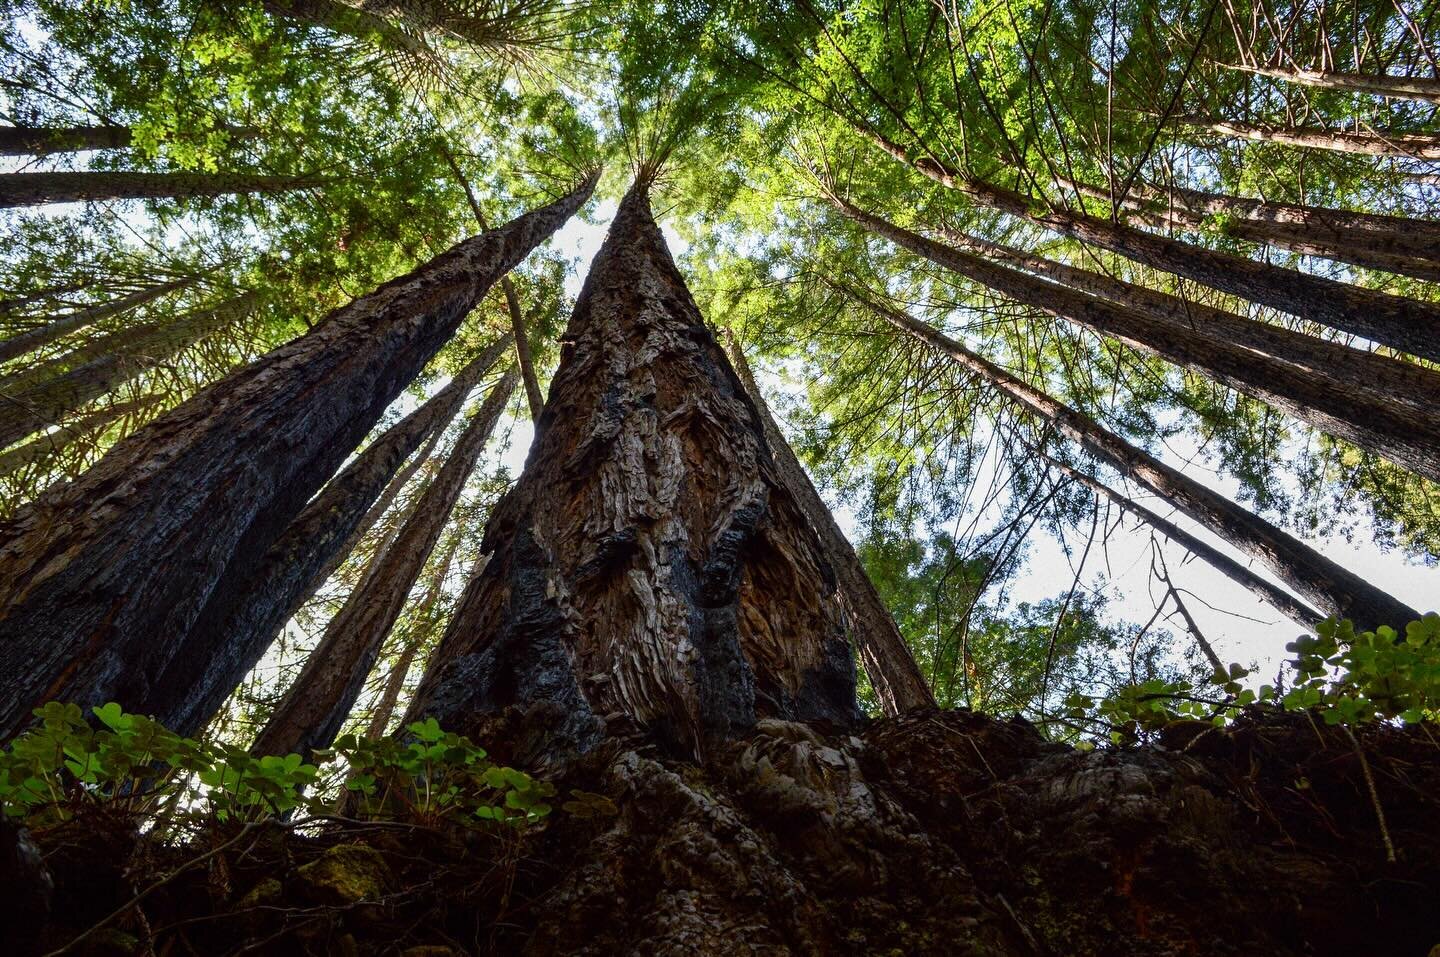 A rare view of a redwood, beneath the roots 🌲

.
.
.
.
#californiaredwoods #californiaredwood #bigsur #bigsurredwoods #limekilnstatepark #californiastateparks #californiaphotographer #californiaphotography #redwoodtree #redwoodtrees